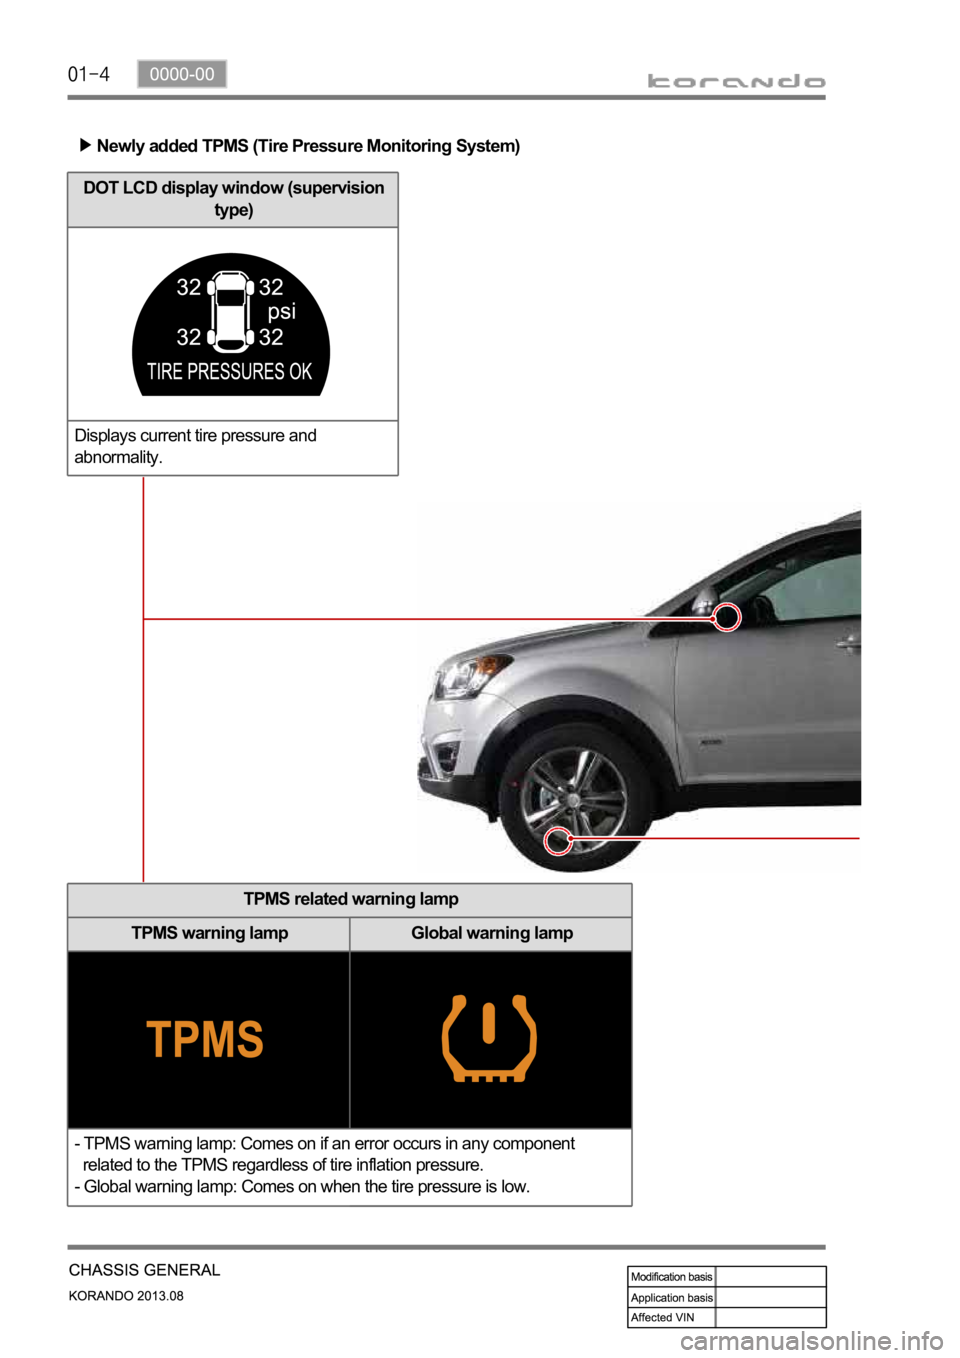 SSANGYONG KORANDO 2013 User Guide Newly added TPMS (Tire Pressure Monitoring System)
TPMS related warning lamp
TPMS warning lamp Global warning lamp
- TPMS warning lamp: Comes on if an error occurs in any component 
  related to the T